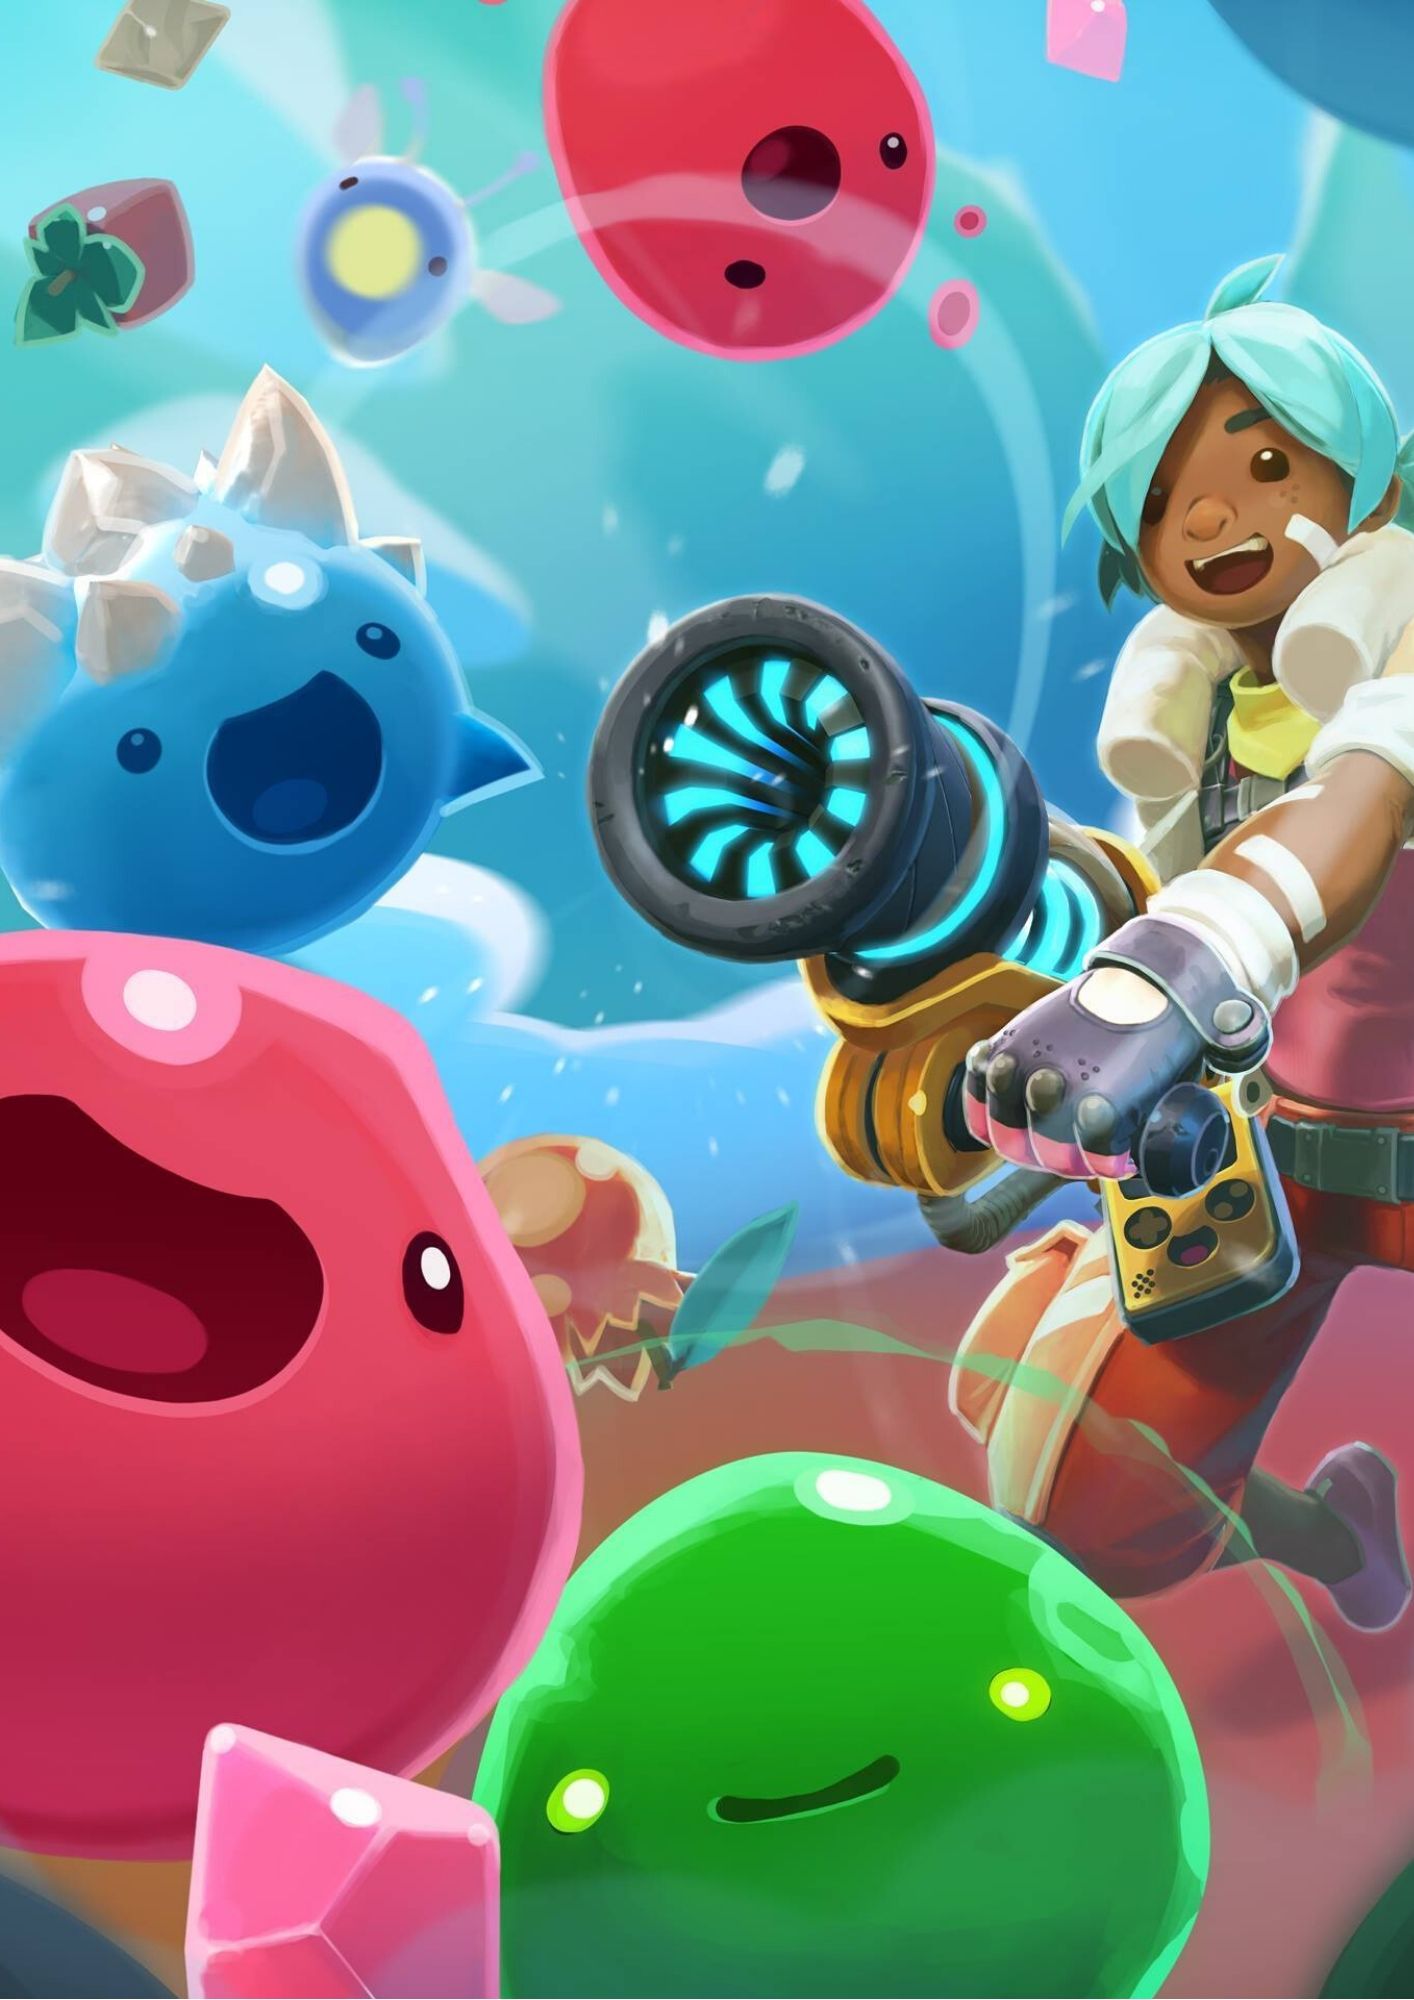 New Games: SLIME RANCHER Deluxe Edition (PS4, Xbox One)